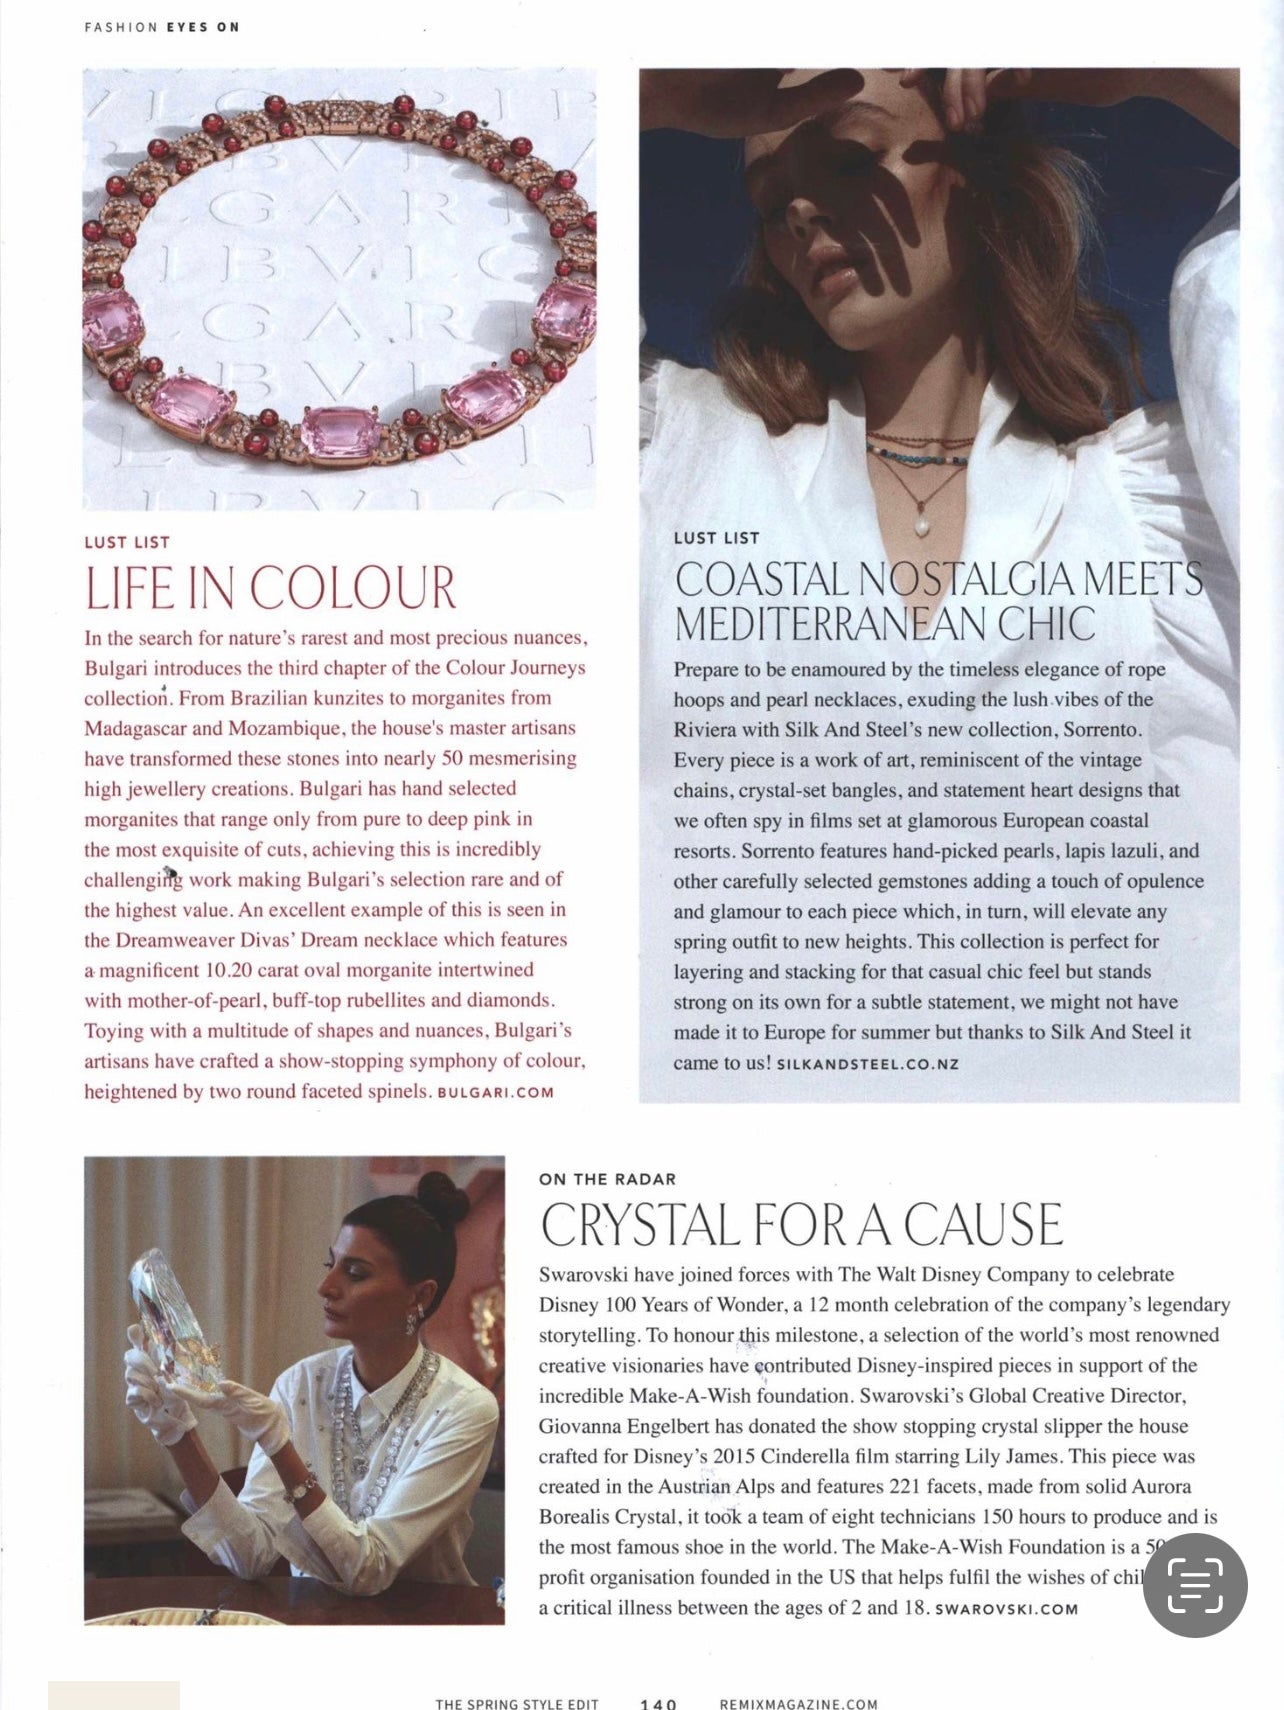 Editorial on Silk & Steel's Sorrento Collection in Remix Magazine